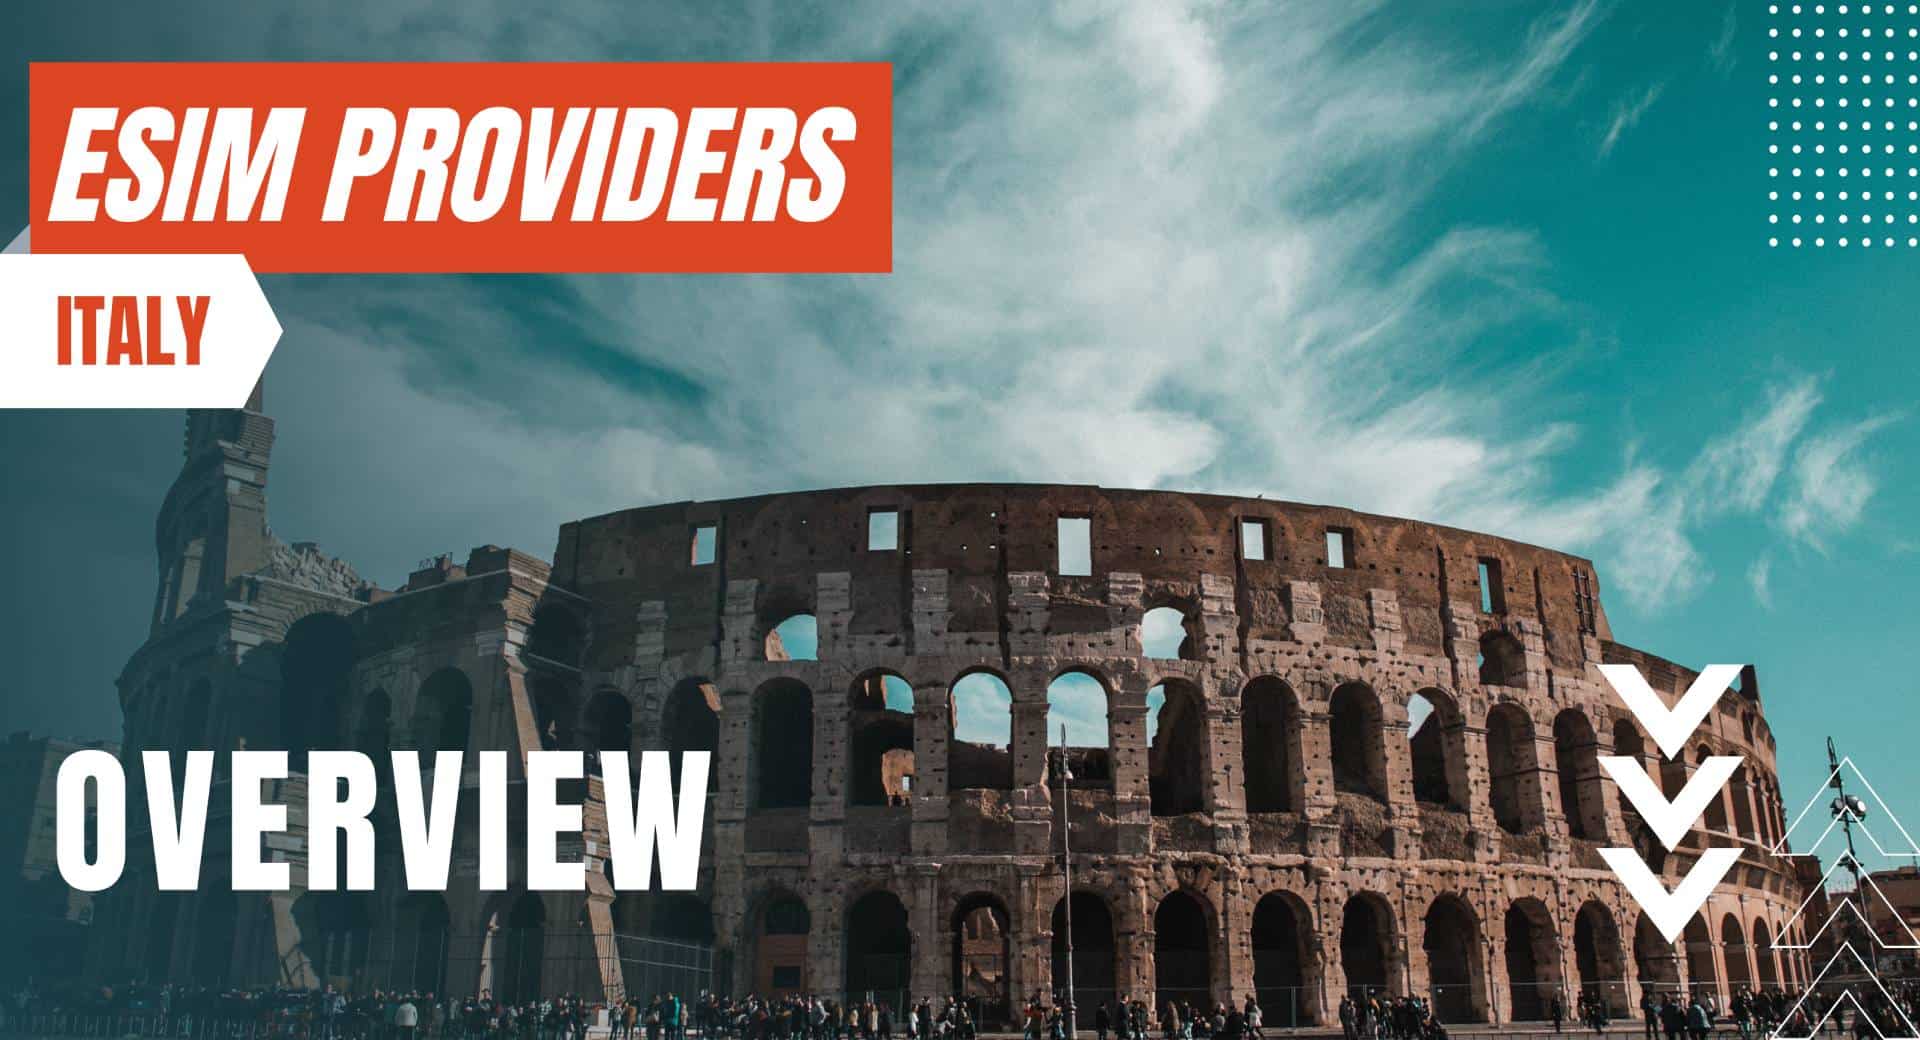 esim providers overview italy